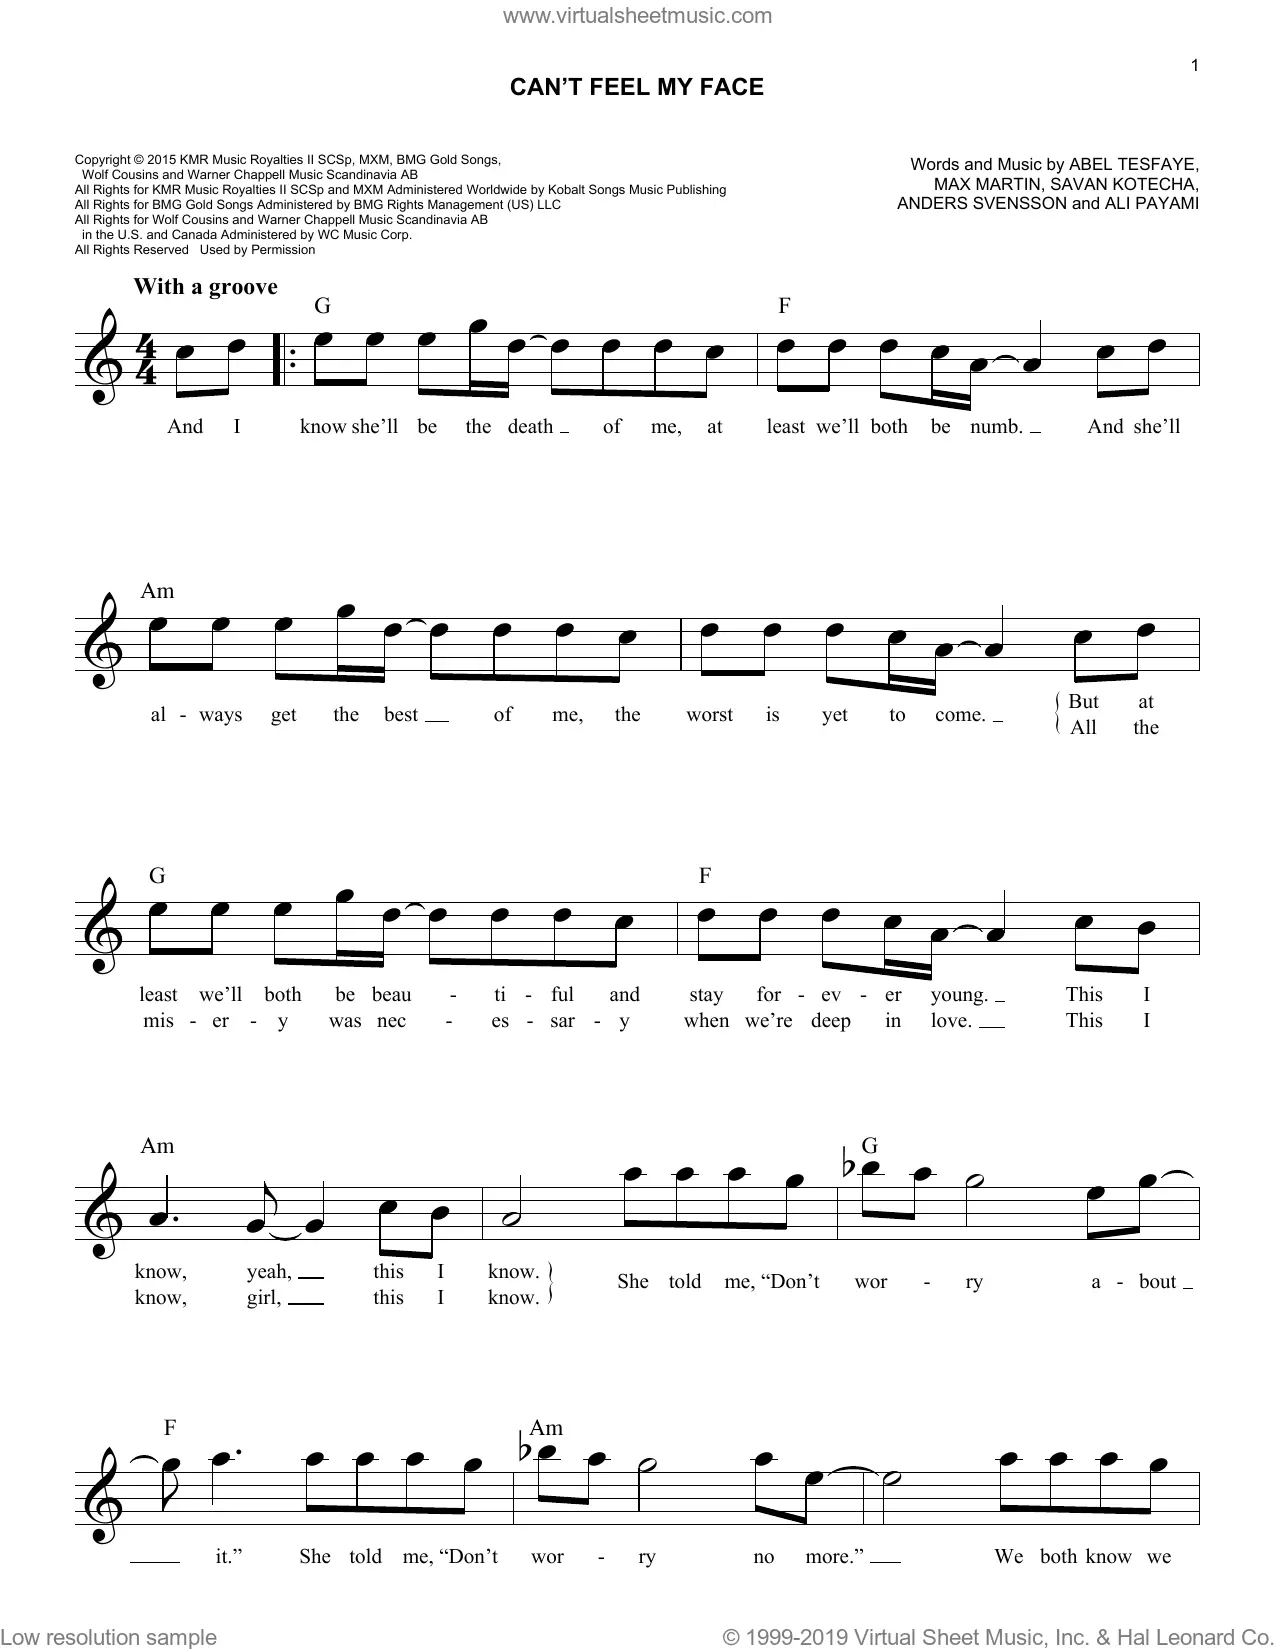 The Weeknd 'Earned It (Fifty Shades Of Grey)' Sheet Music & Chords